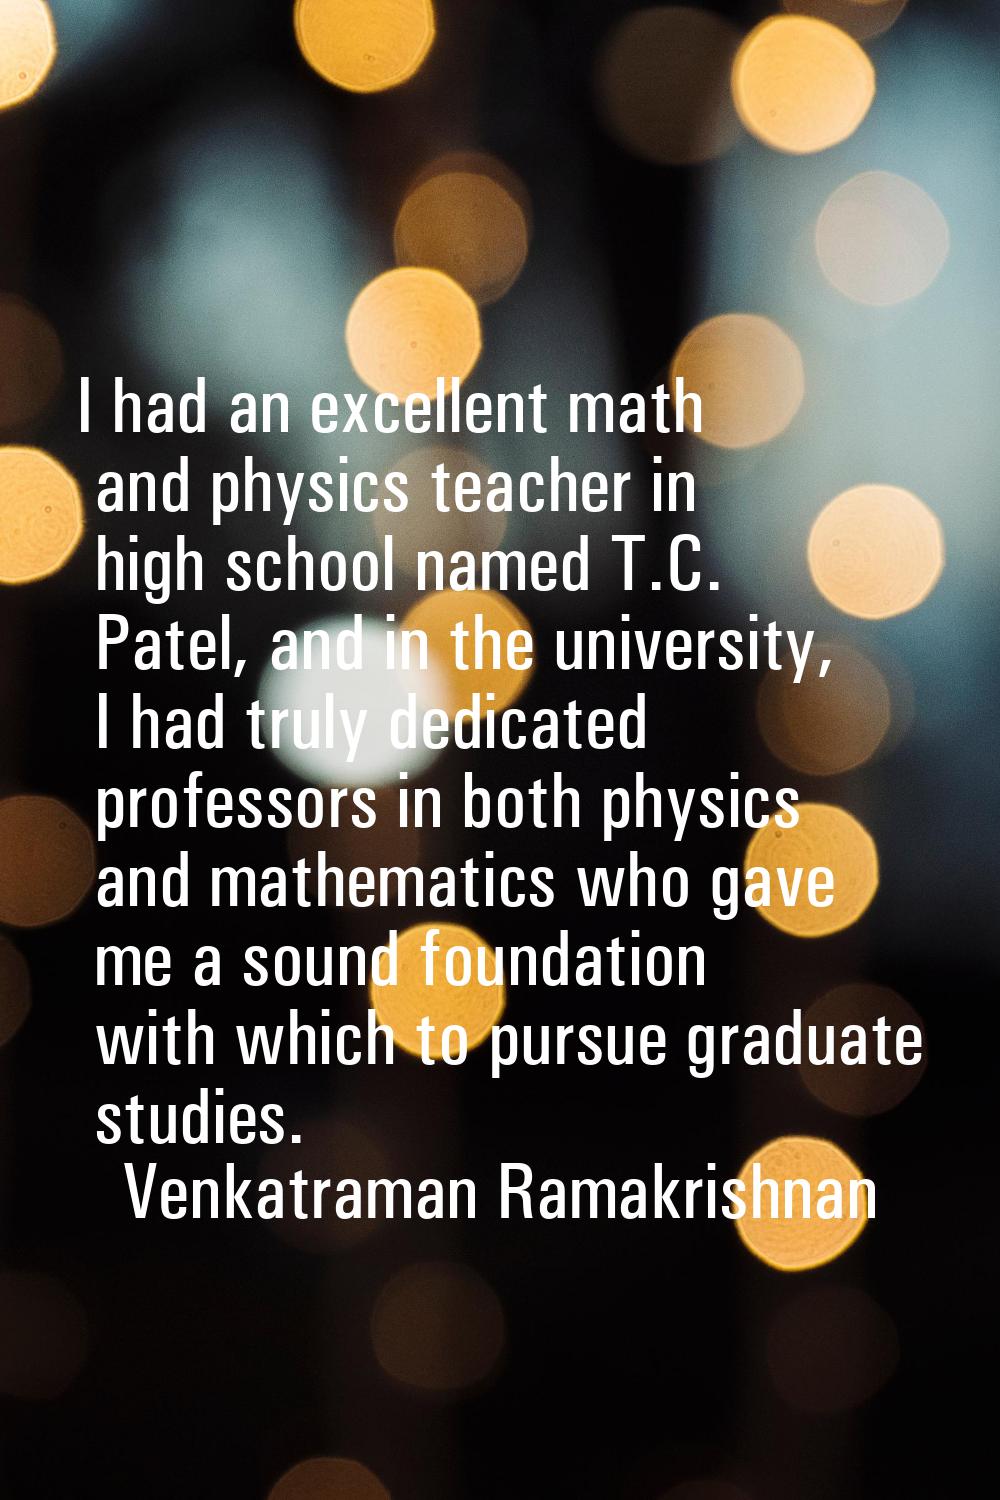 I had an excellent math and physics teacher in high school named T.C. Patel, and in the university,